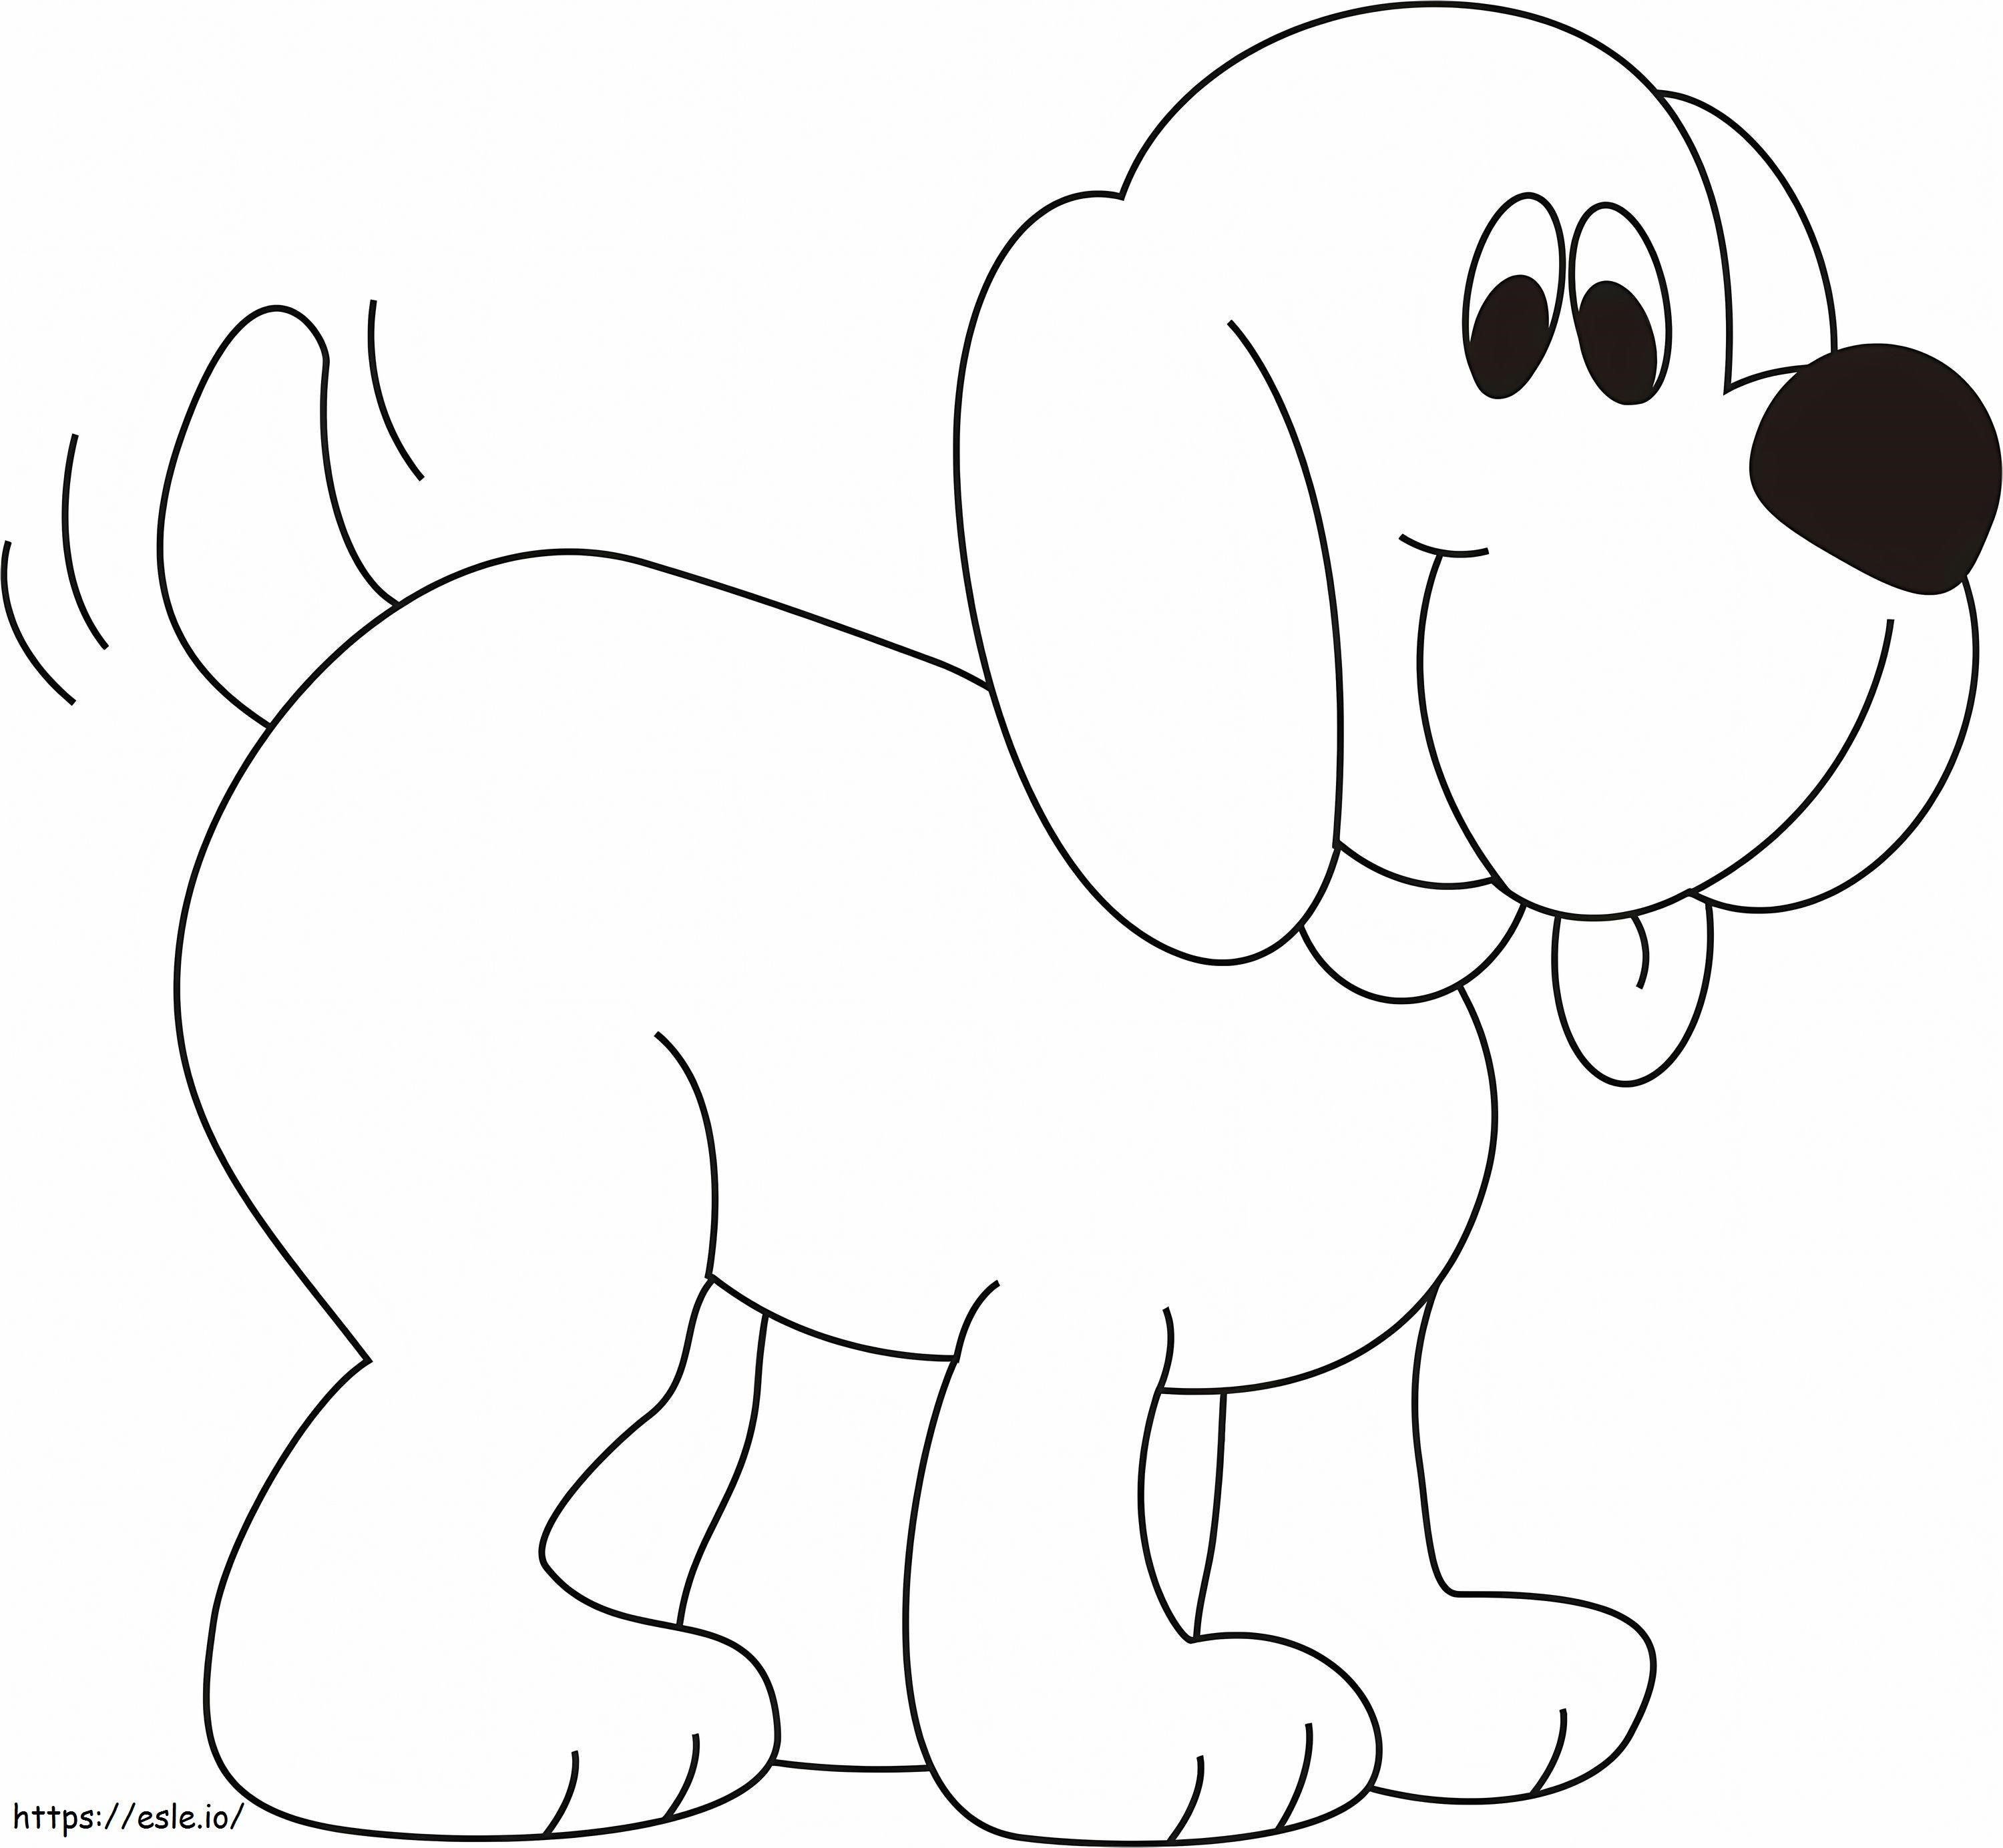 Funny Dog coloring page